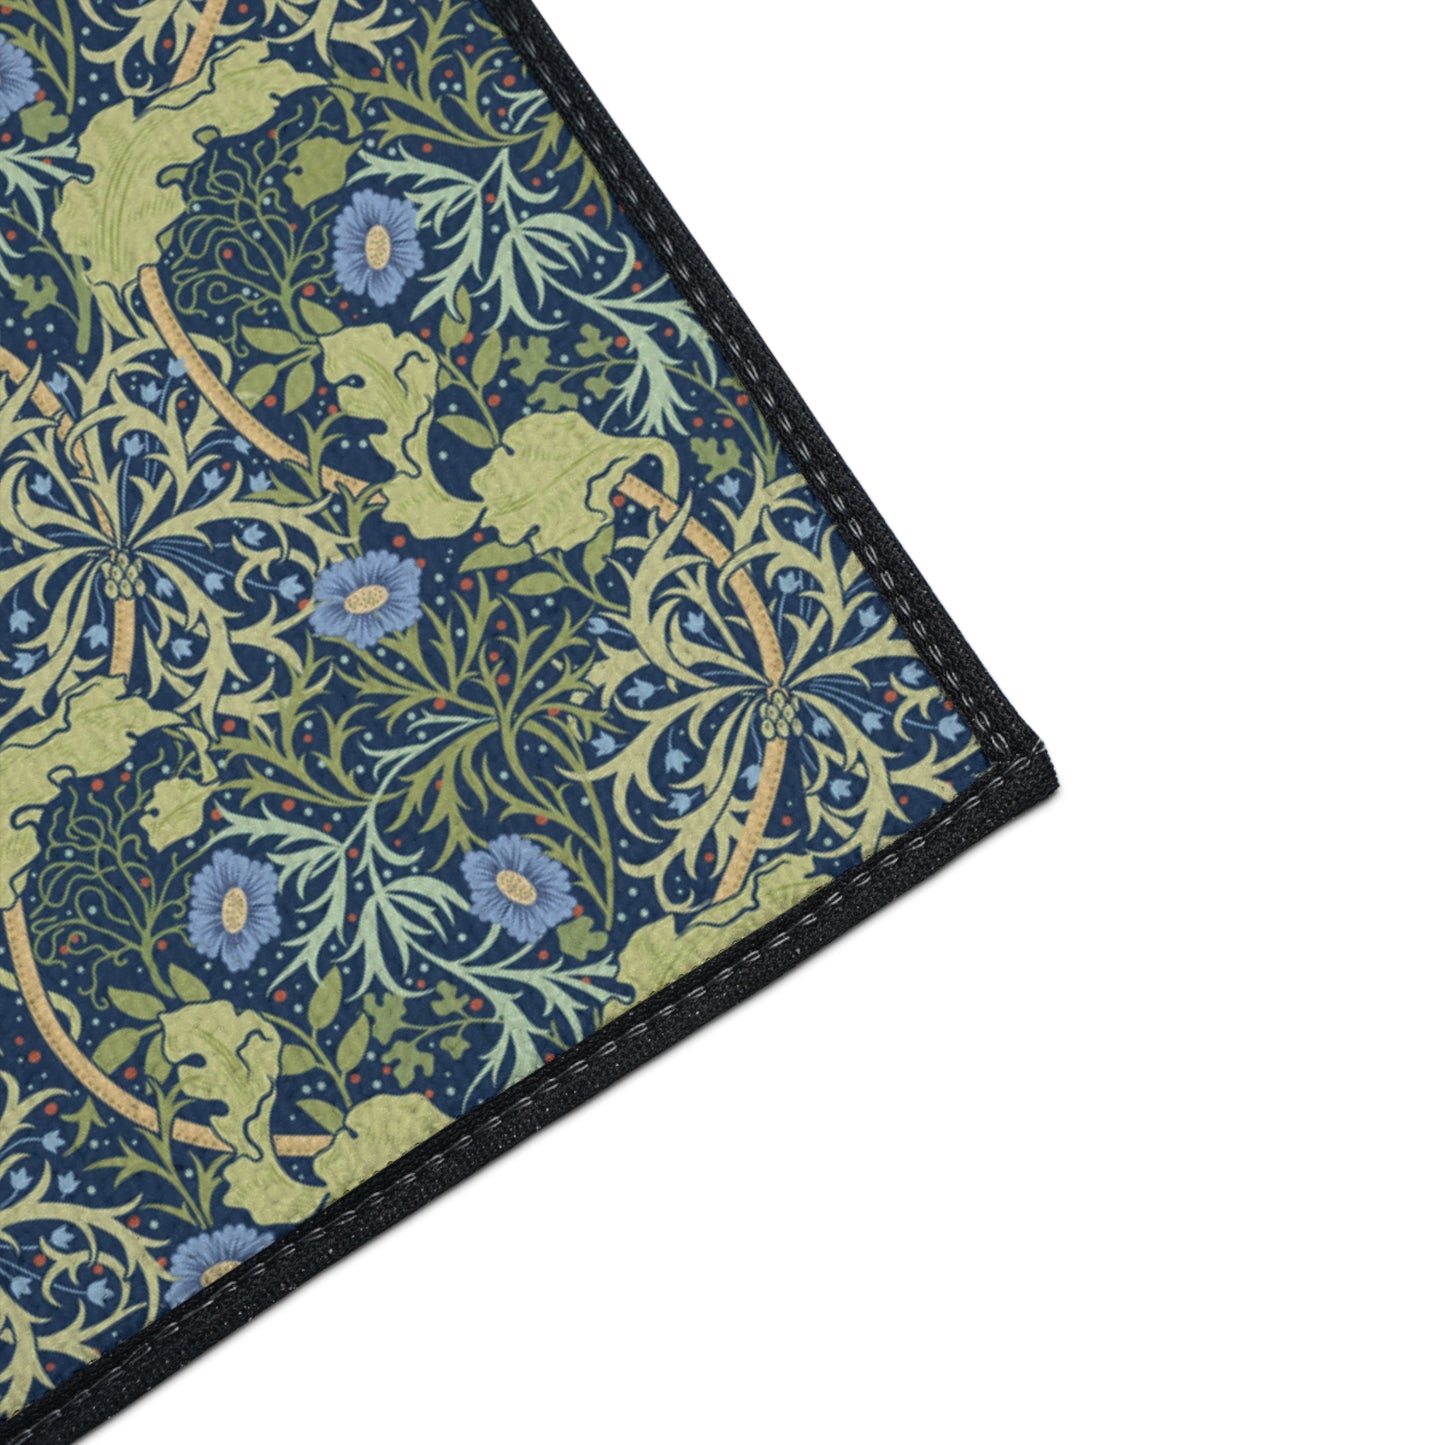 william-morris-co-heavy-duty-floor-mat-seaweed-collection-blue-flowers-10